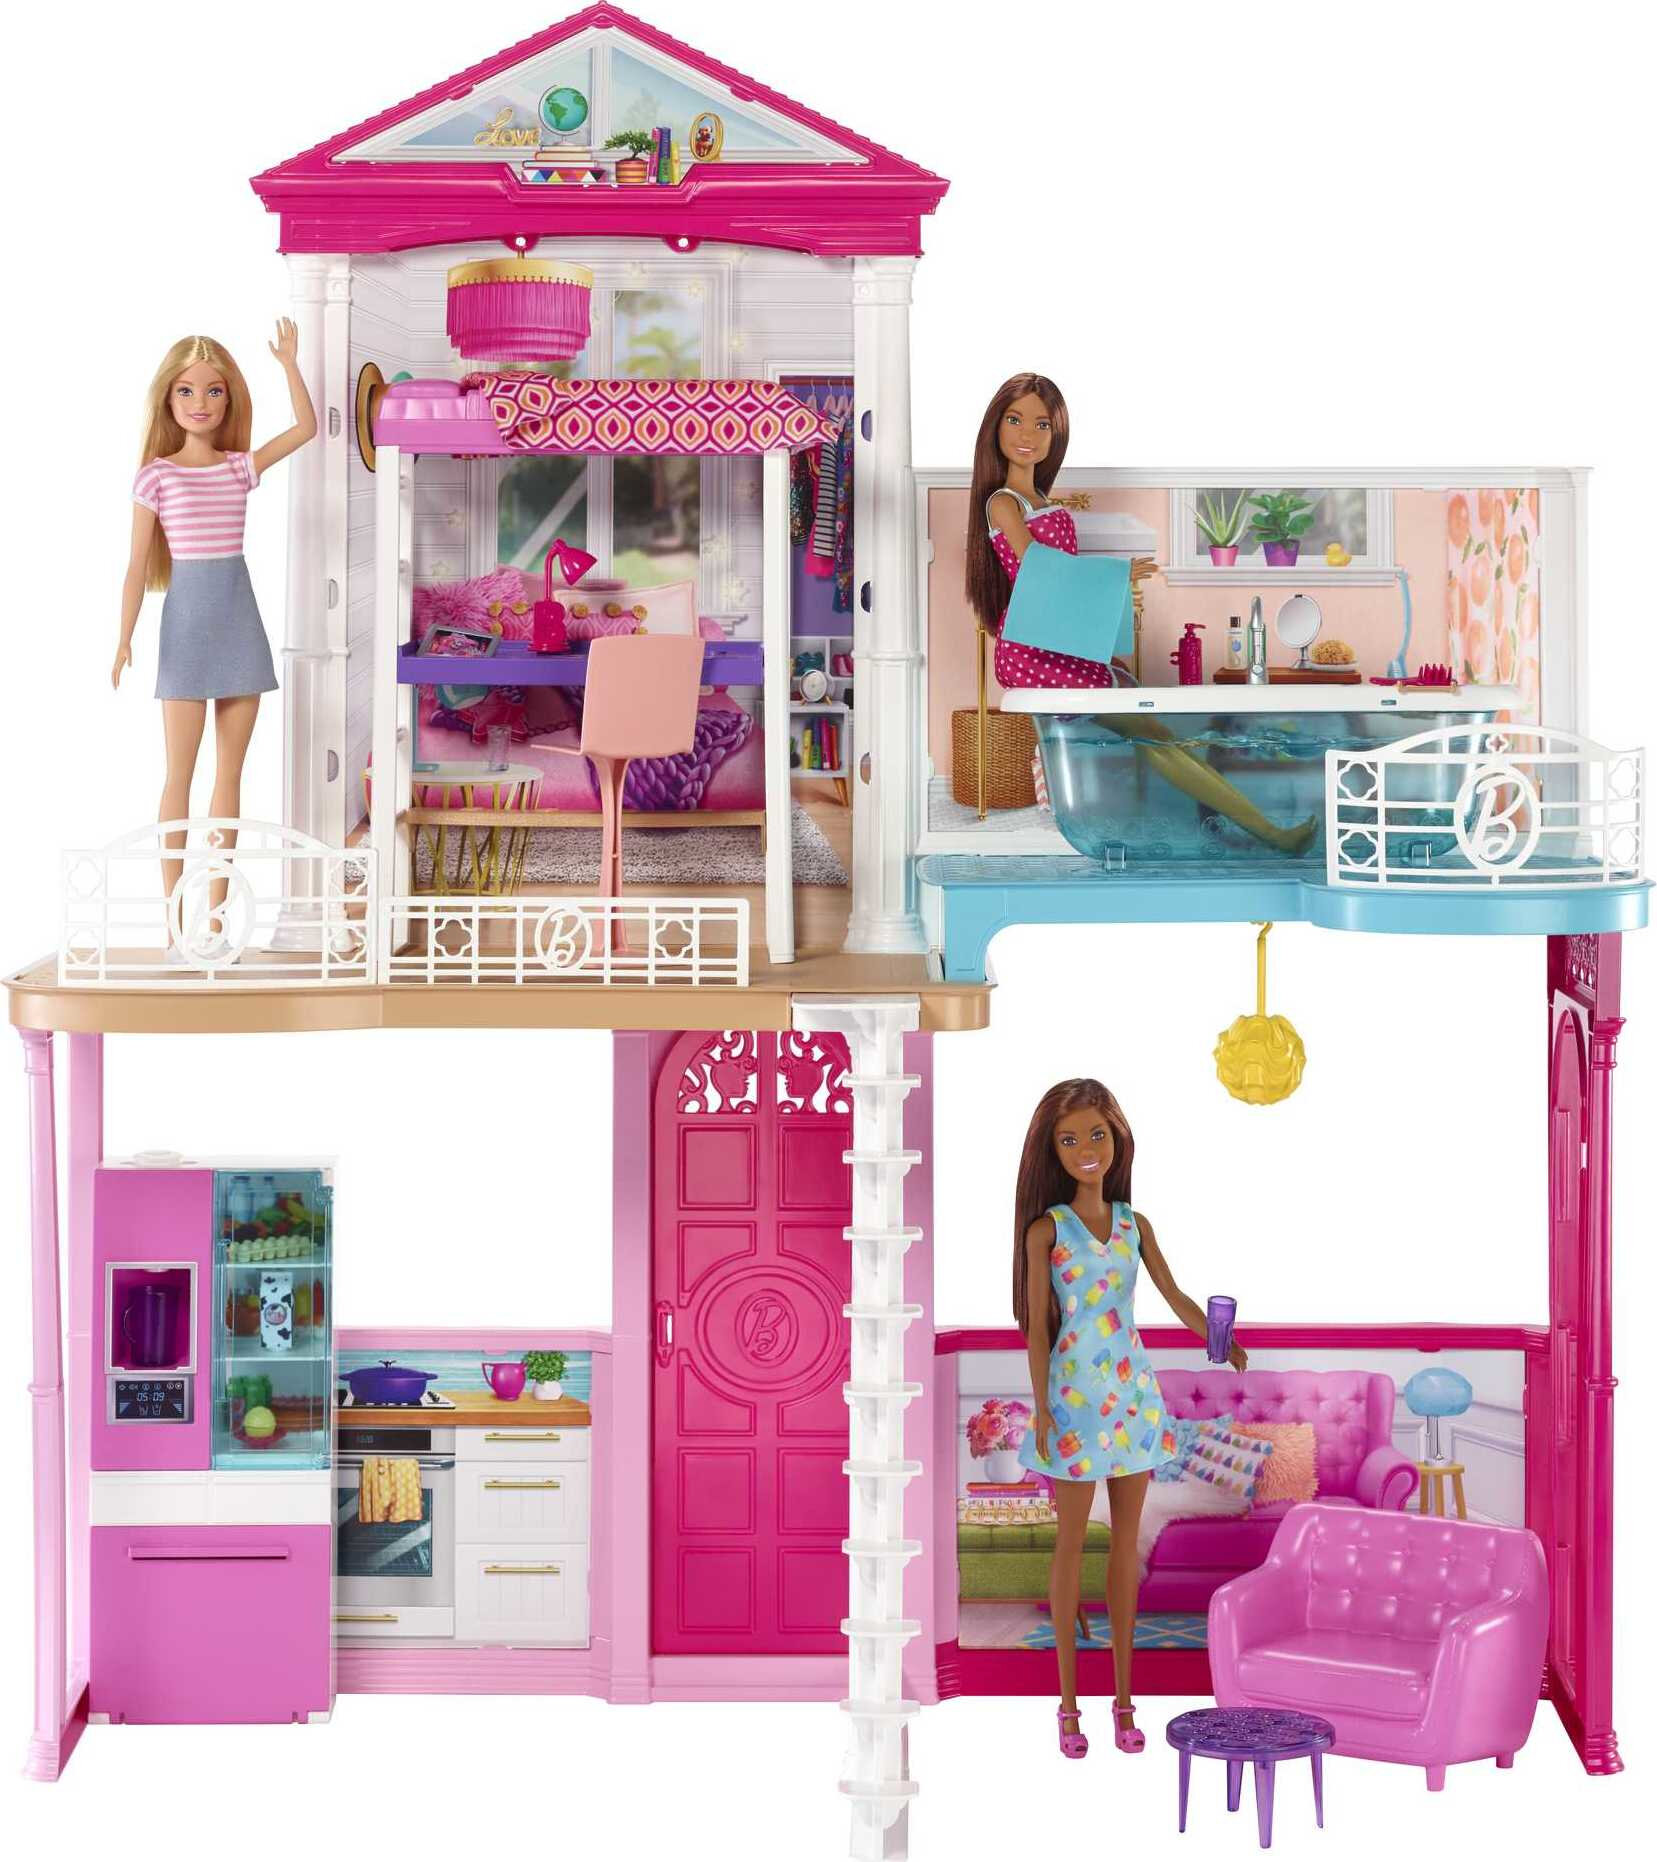 Barbie Dollhouse Set with 3 Dolls and Furniture, Pool and Accessories, Ages 4 & up - image 1 of 6